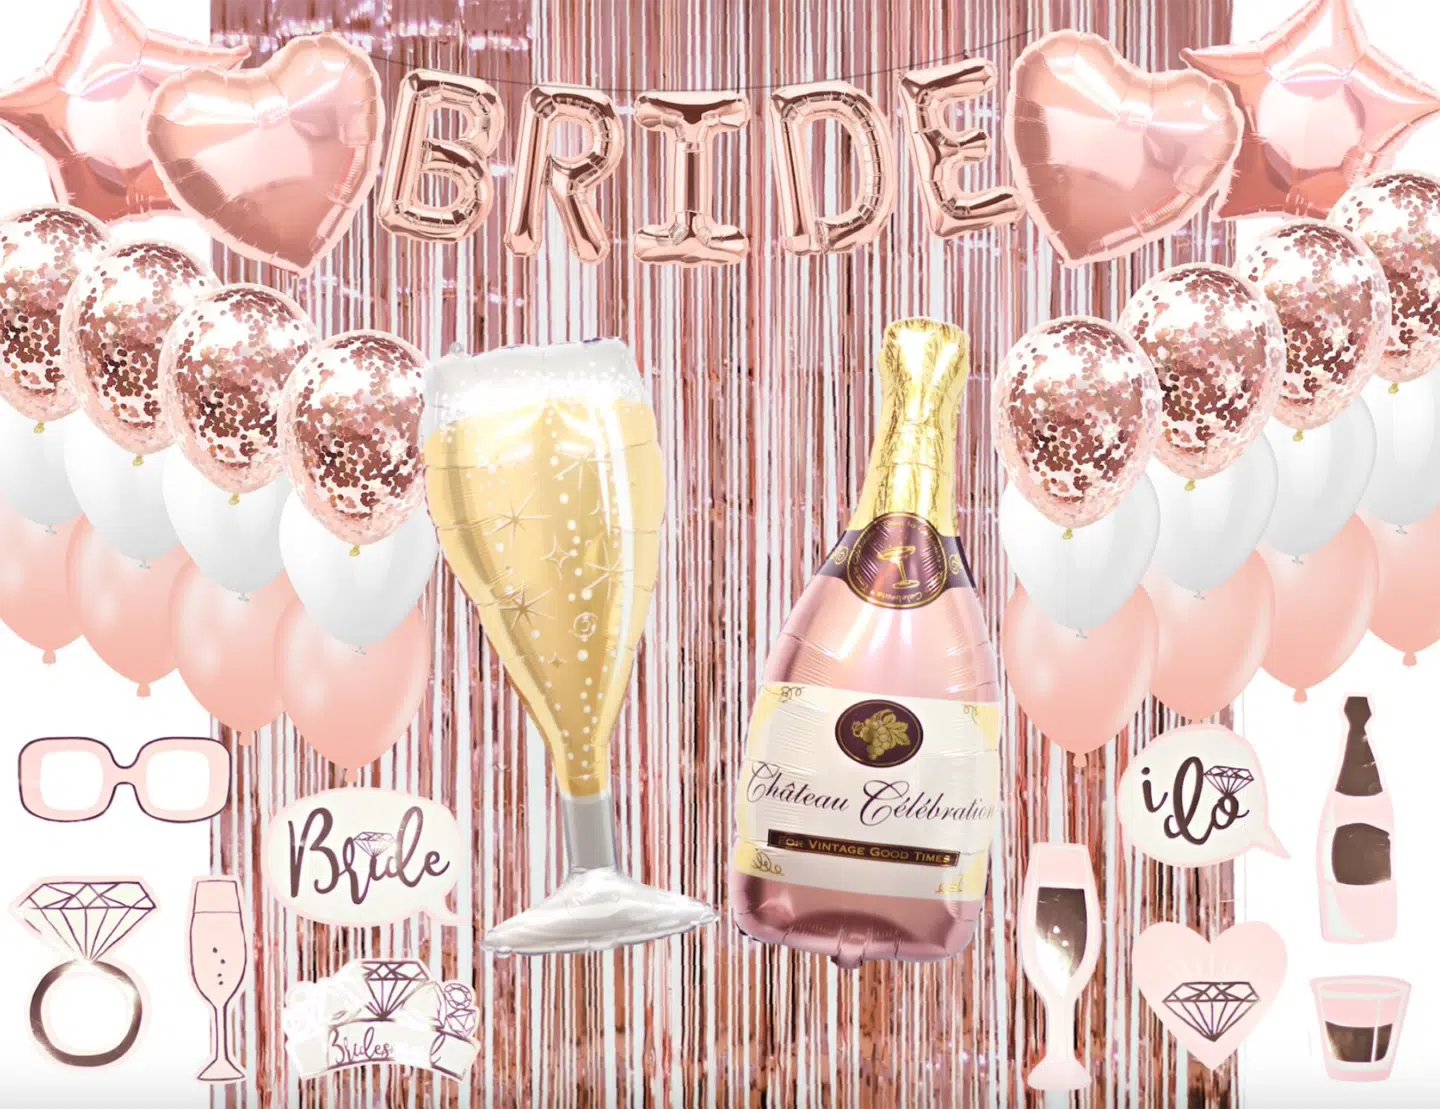 Fun bachelorette party themes, by wedding blogger What The Fab